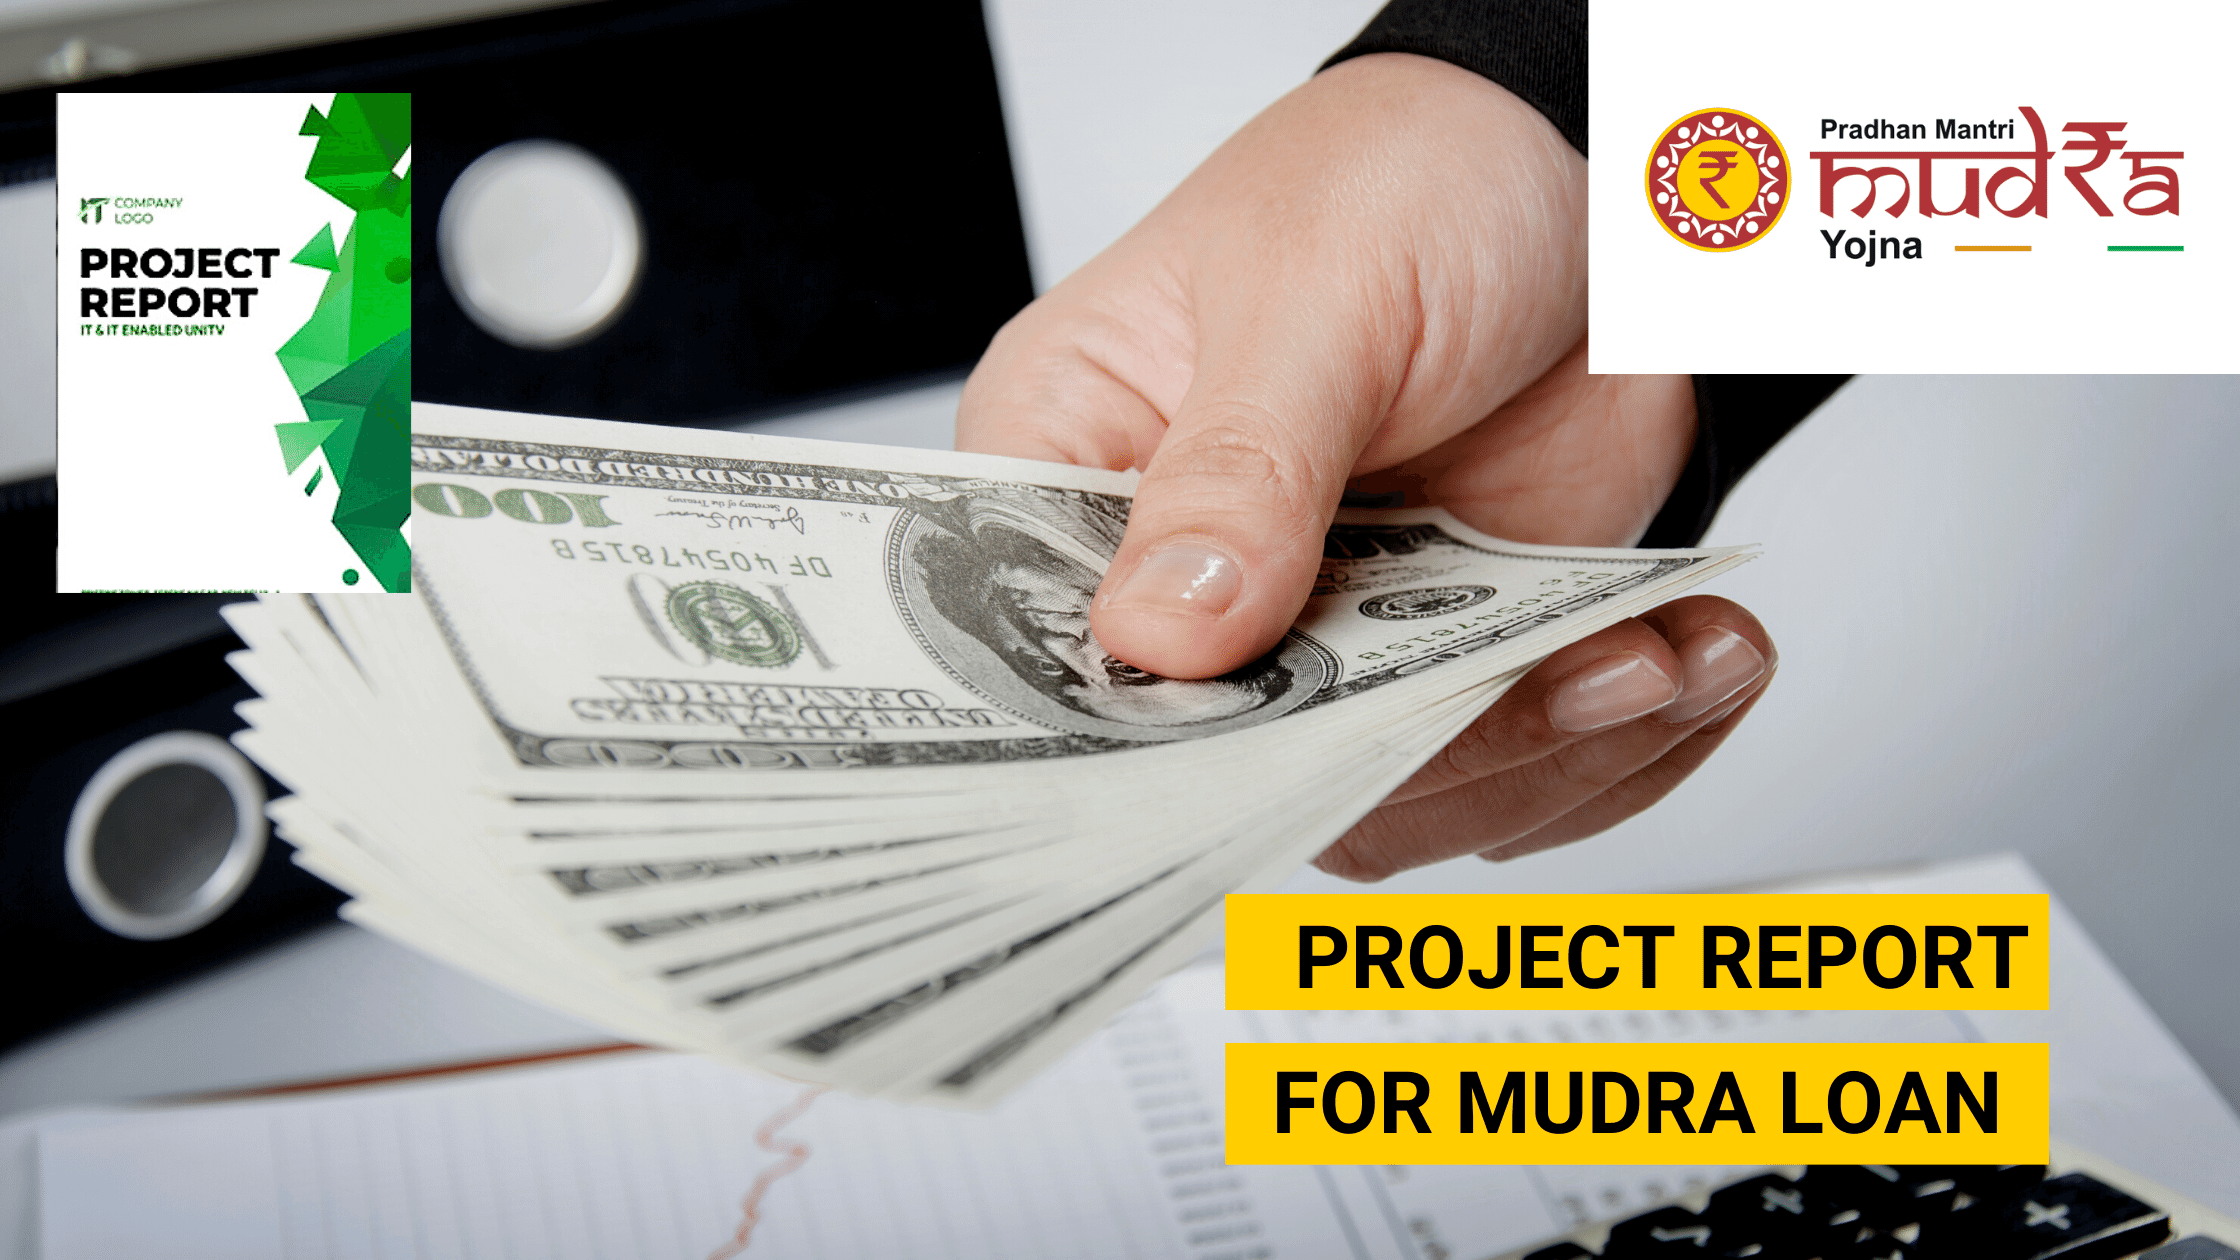 Project Report for Mudra Loan